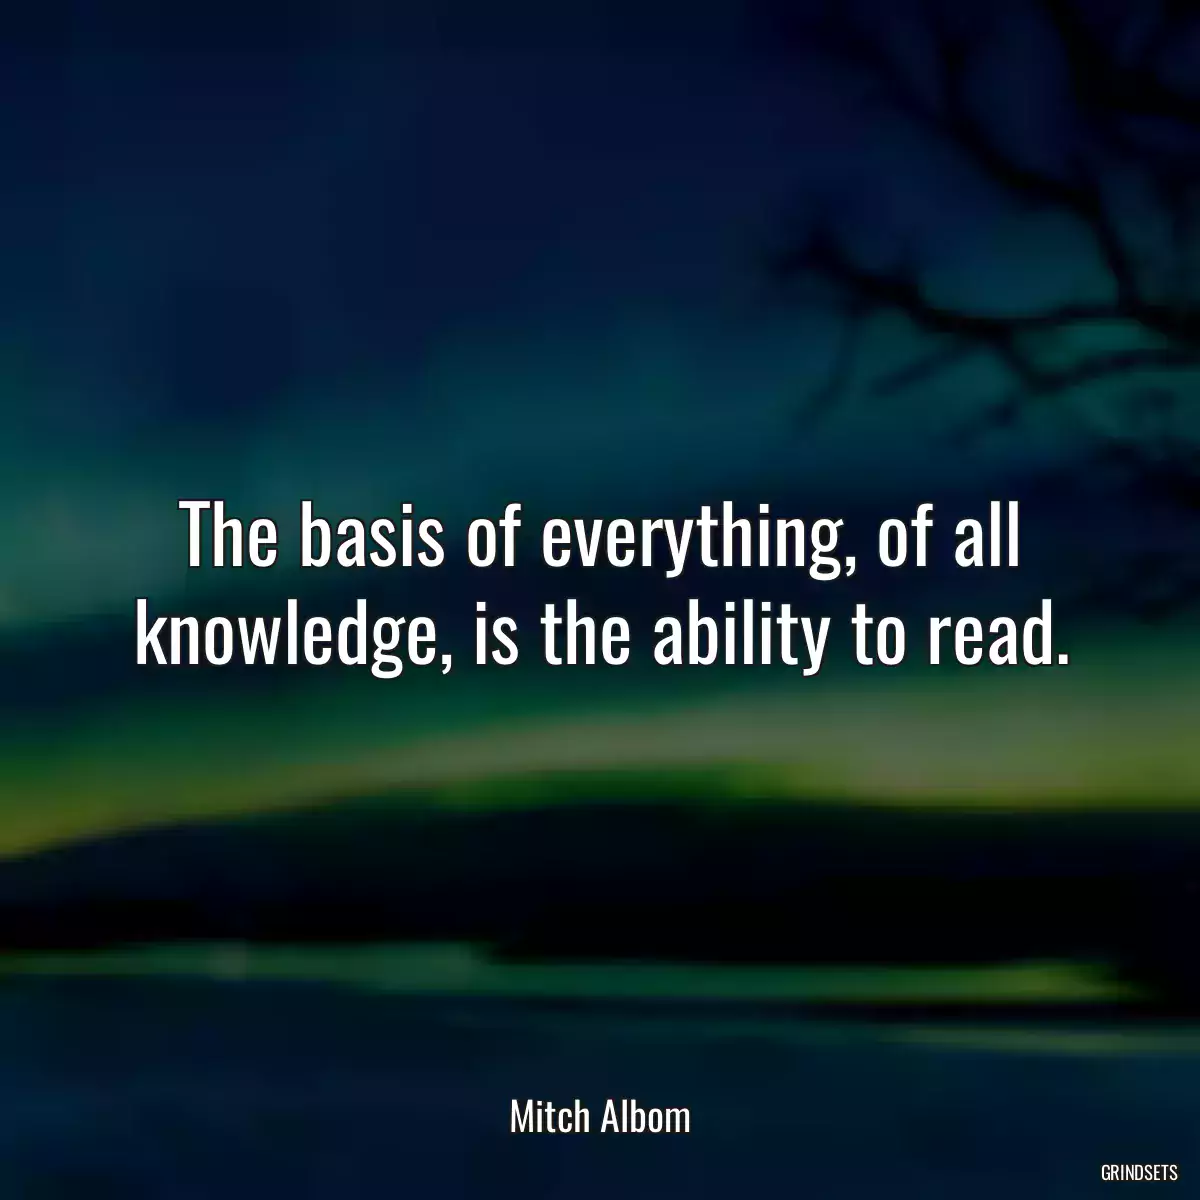 The basis of everything, of all knowledge, is the ability to read.